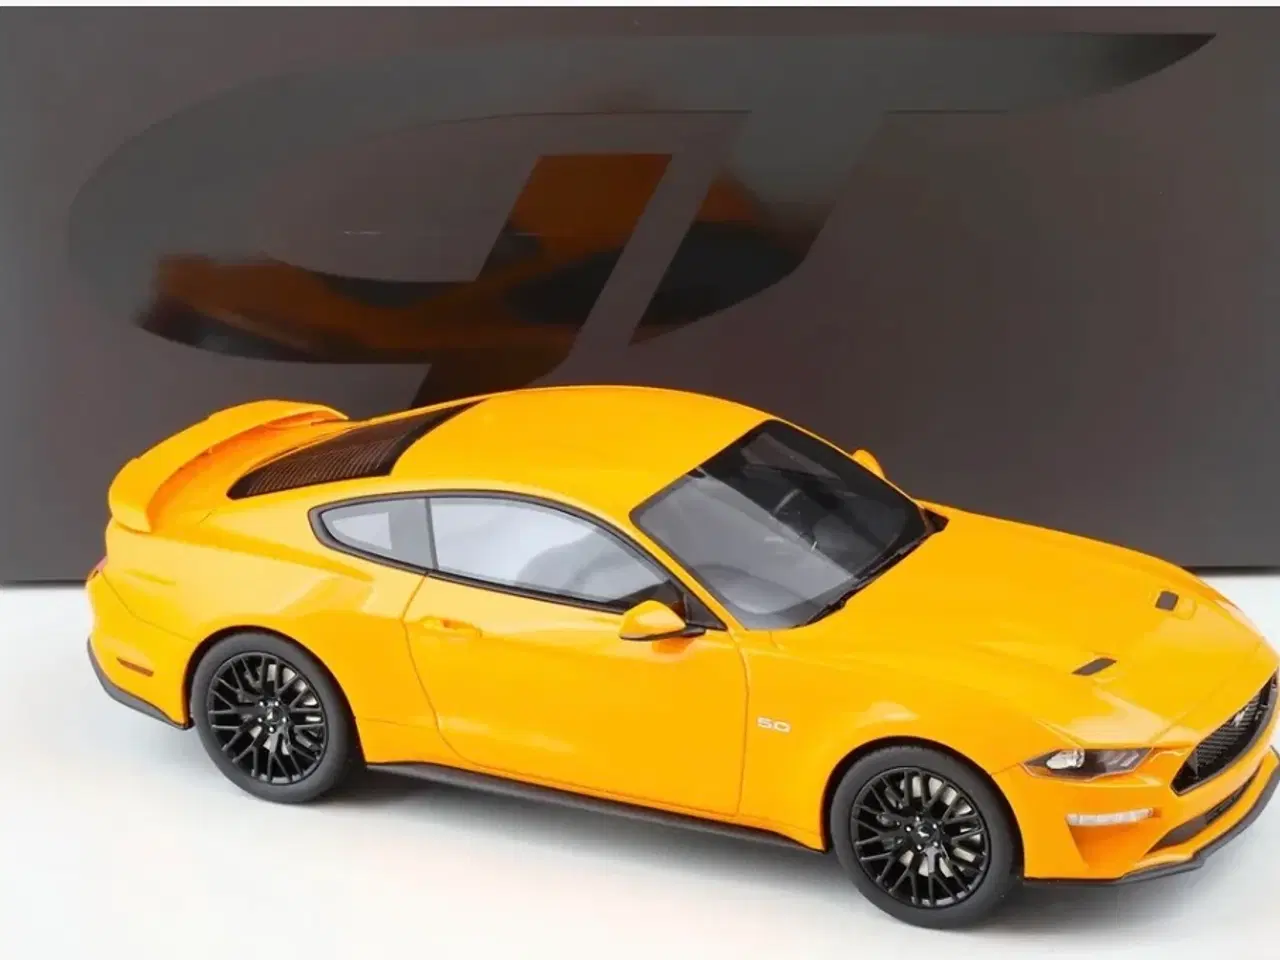 Billede 2 - 1:18 Ford Mustang GT Coupe 2019